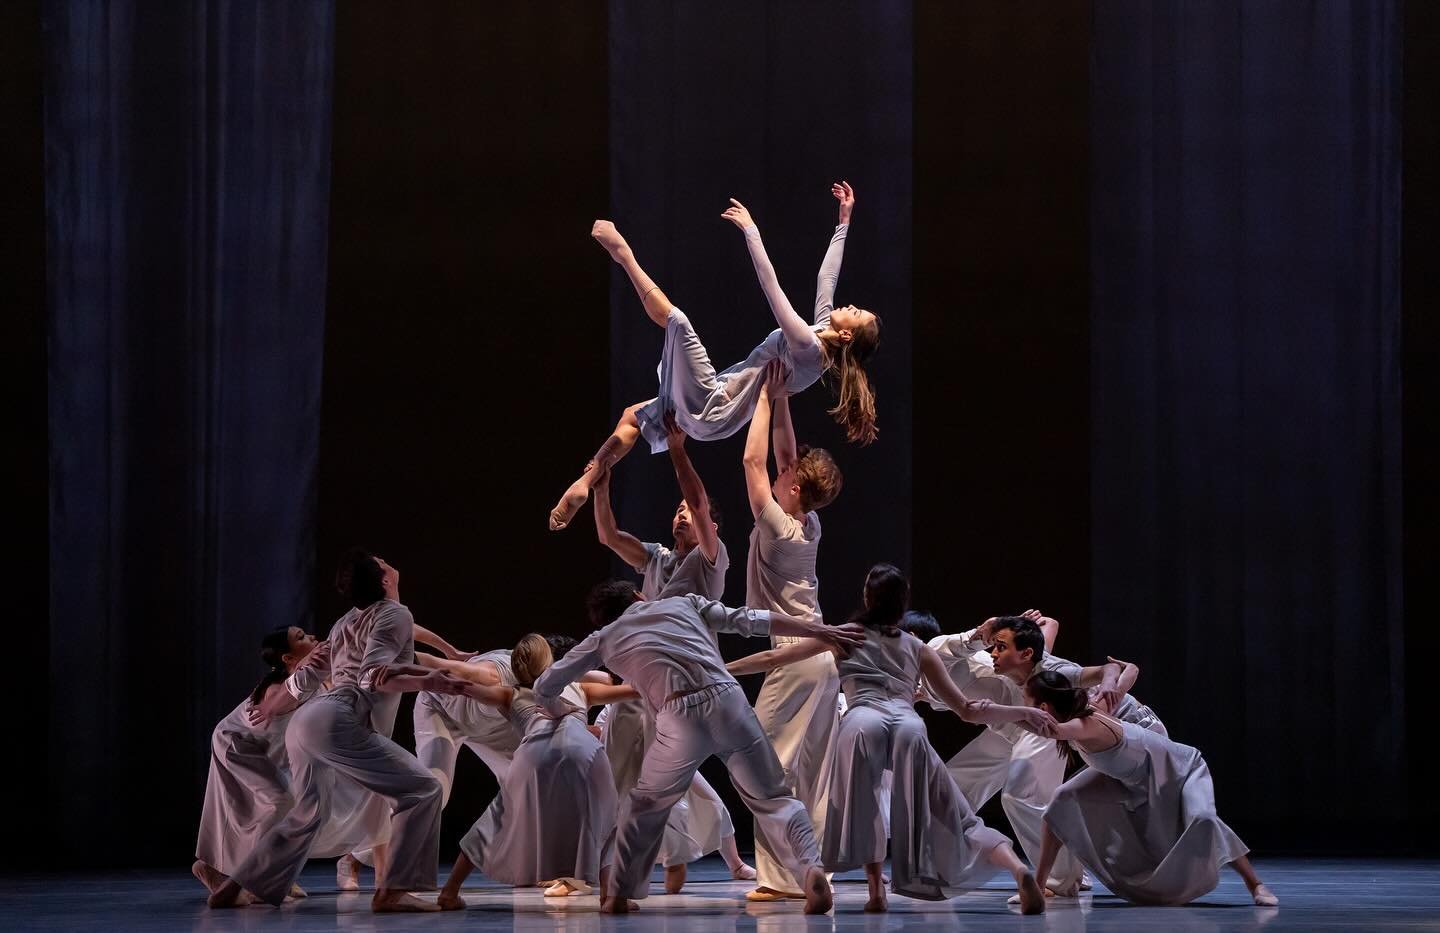 Another week of &bull;Hungry Ghosts&bull; in Studies in Blue @joffreyballet @lyricopera Chicago 

Photo Cheryl Mann @cherylmannphoto 
Music @jeremy_birchall_music